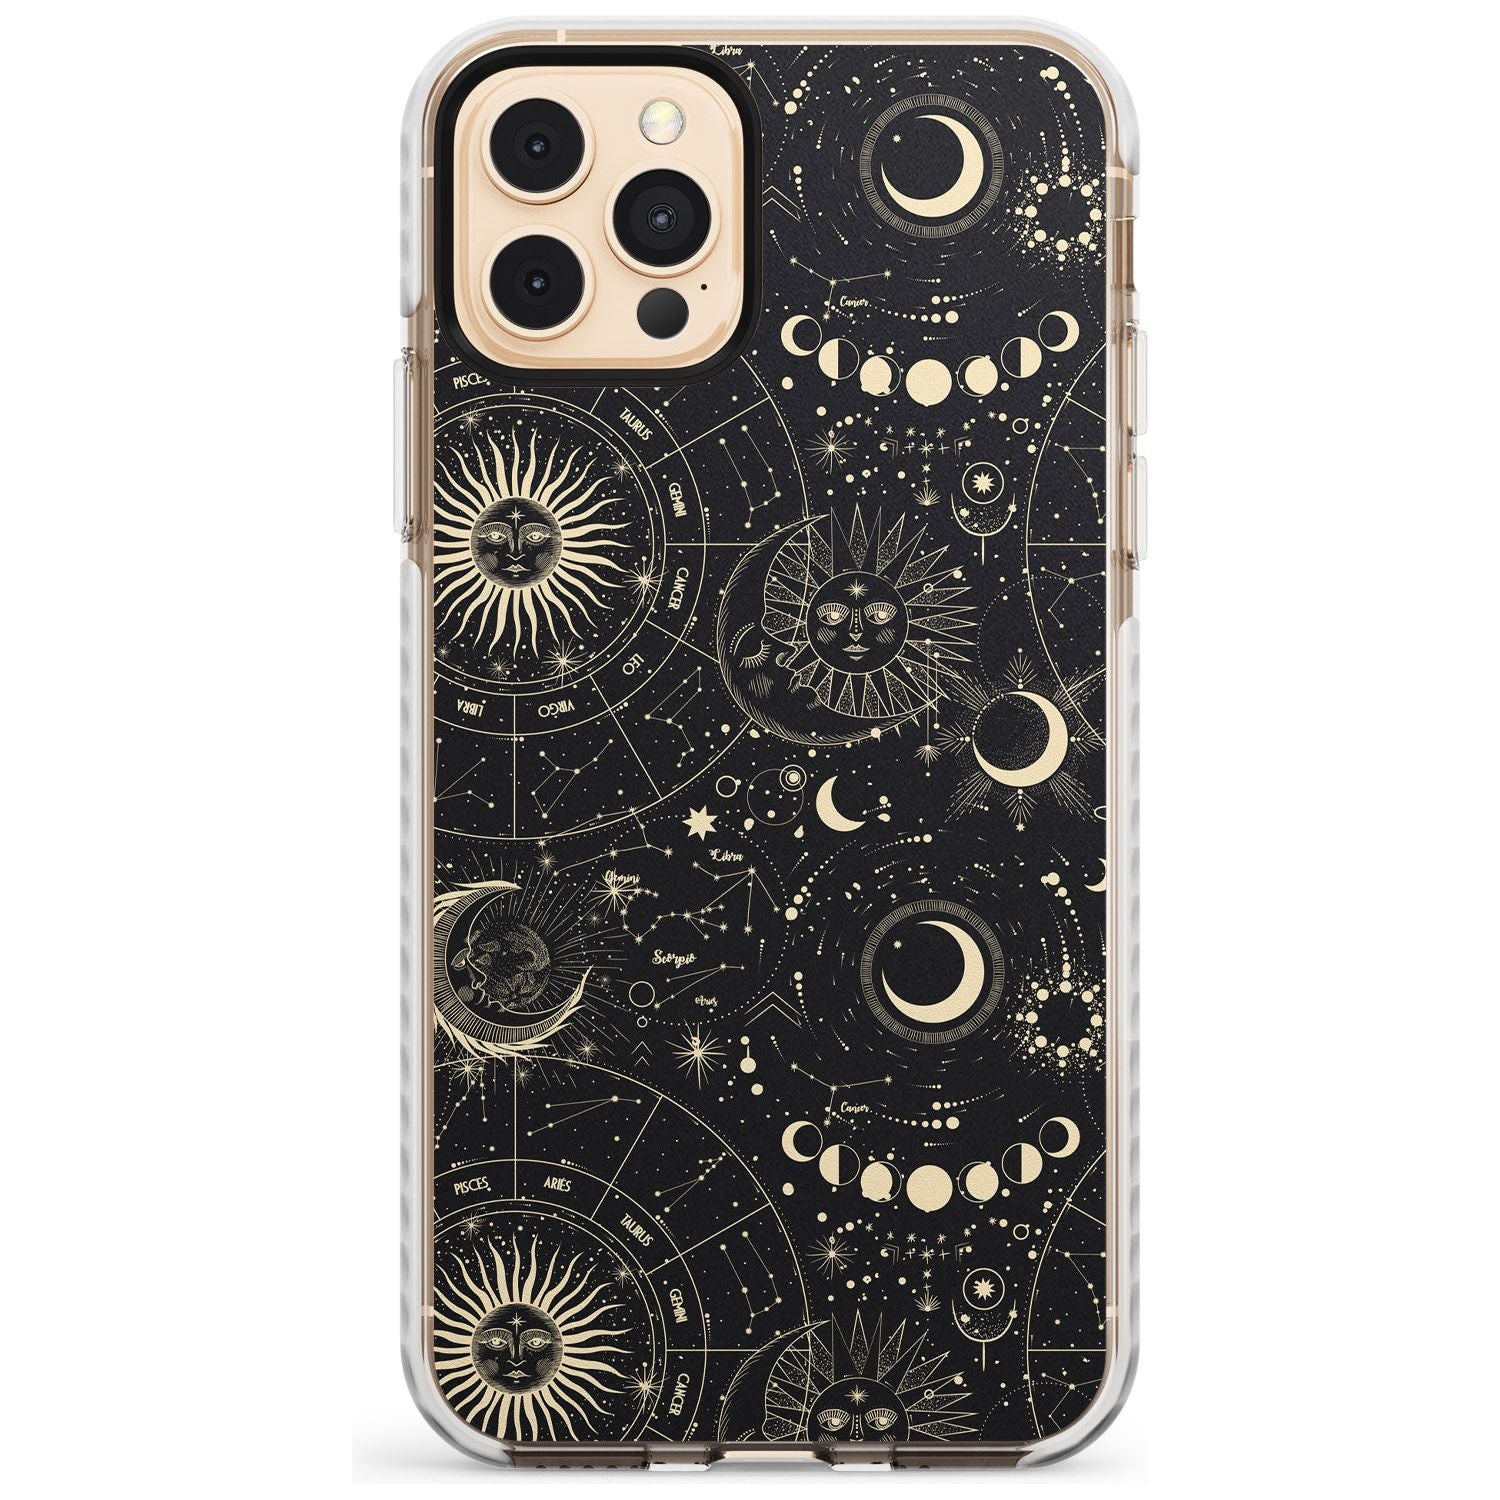 Suns, Moons & Star Signs Slim TPU Phone Case for iPhone 11 Pro Max